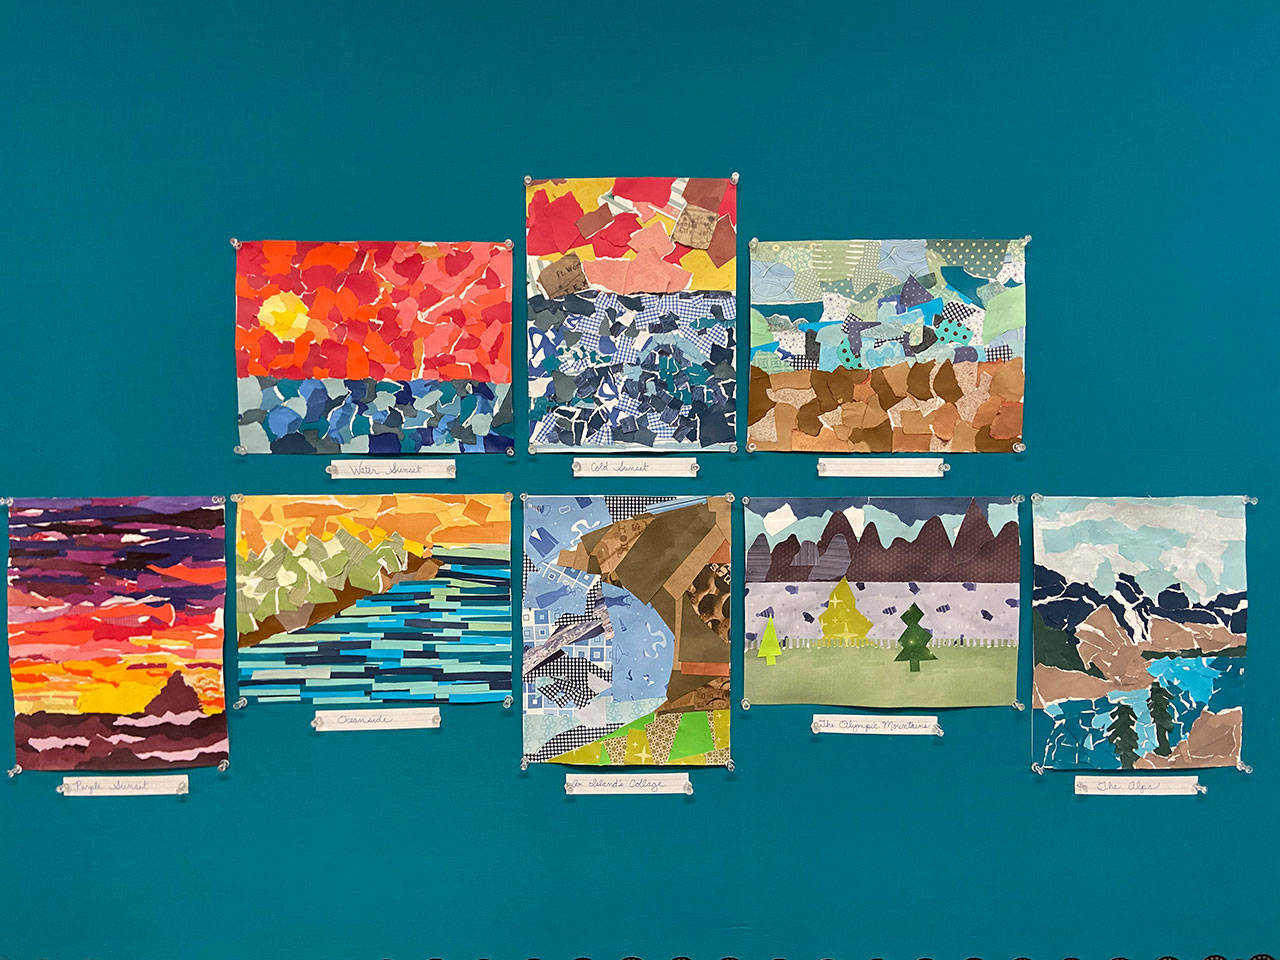 Olympic Christian School students in seventh and eighth grade created this collage. The school recently celebrated its annual art show. Submitted photo